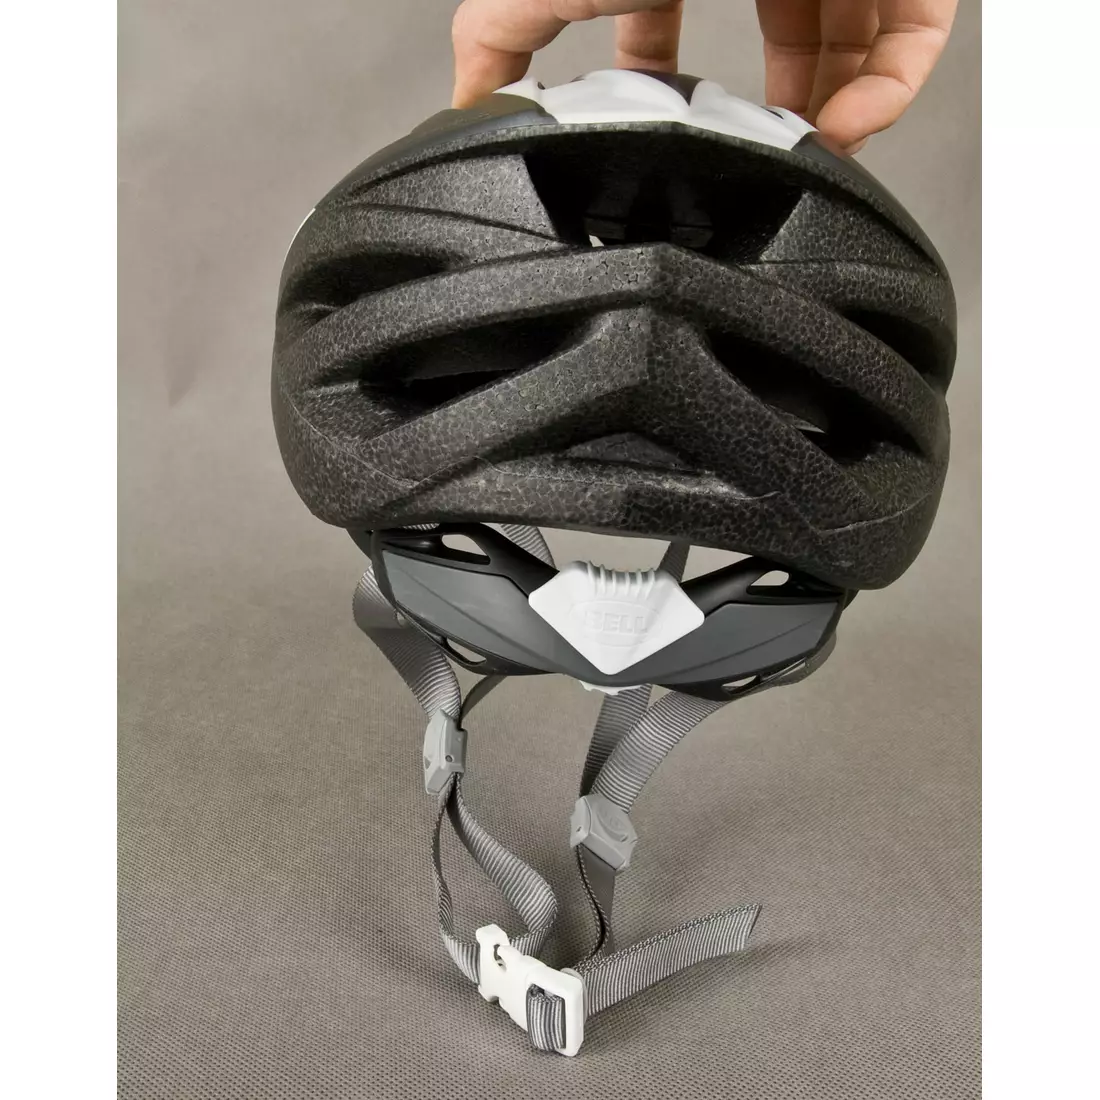 BELL PRESIDIO - bicycle helmet, color: White and silver